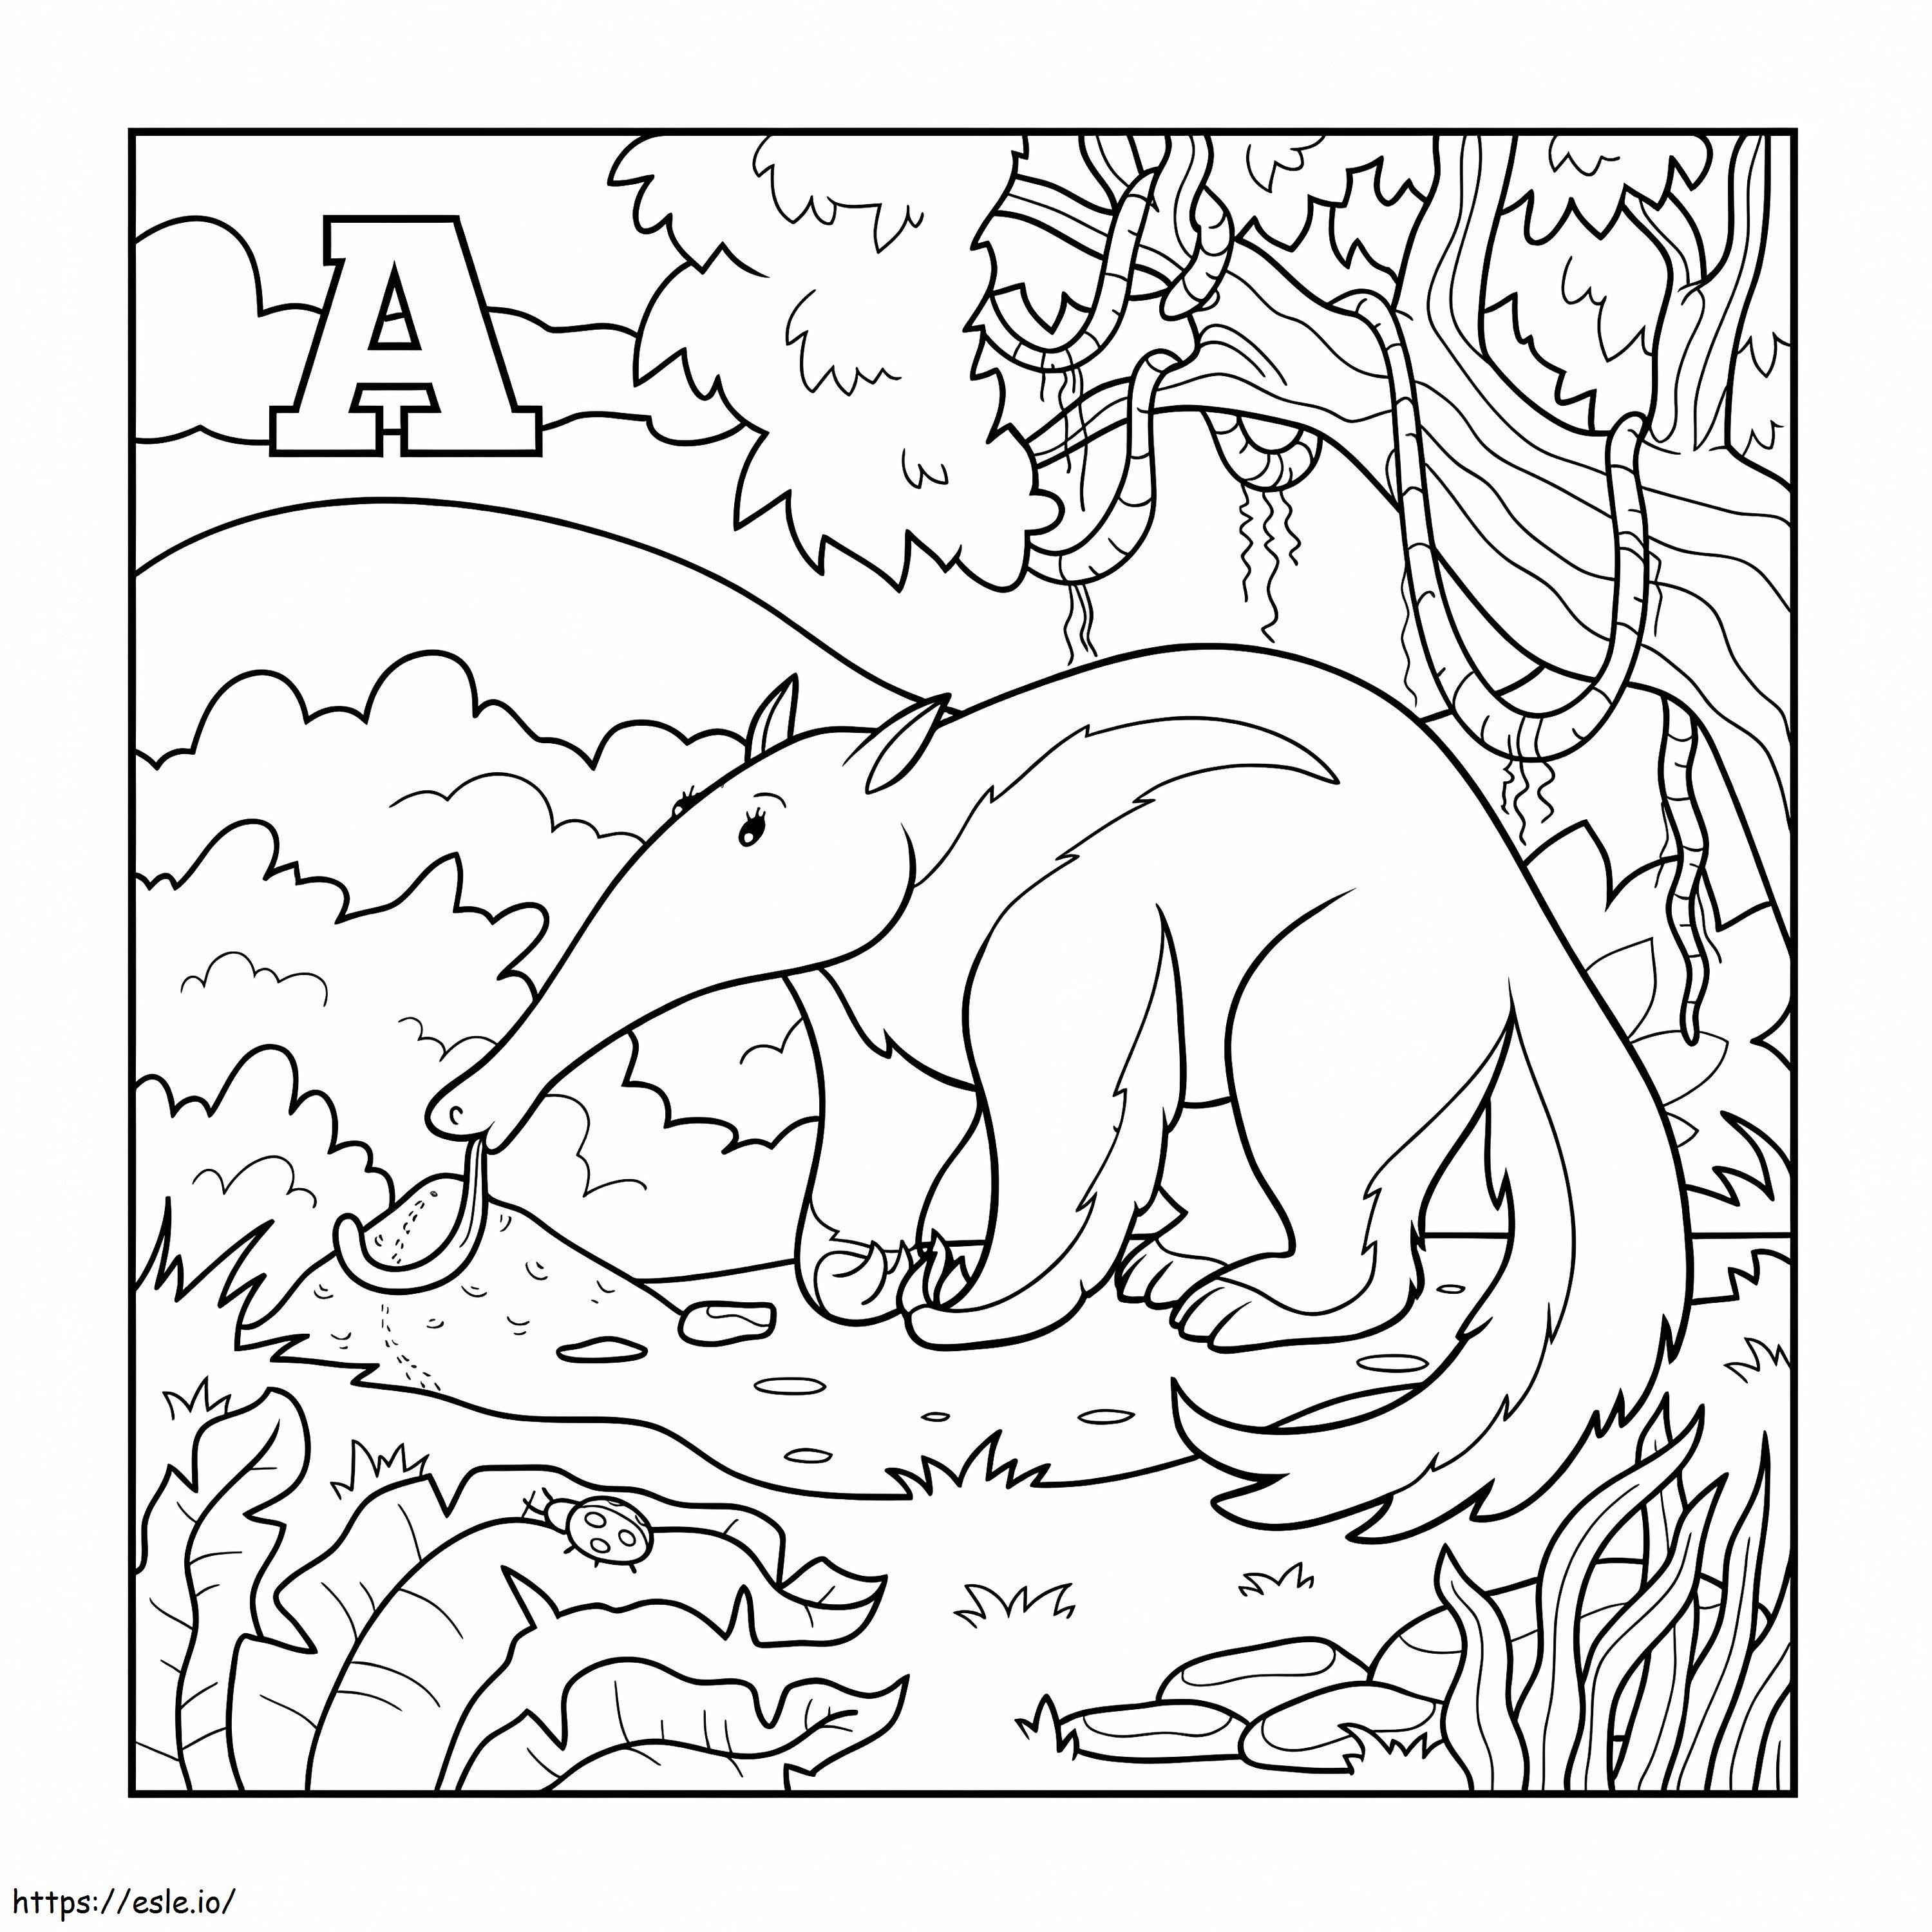 A Wild Aardvark coloring page